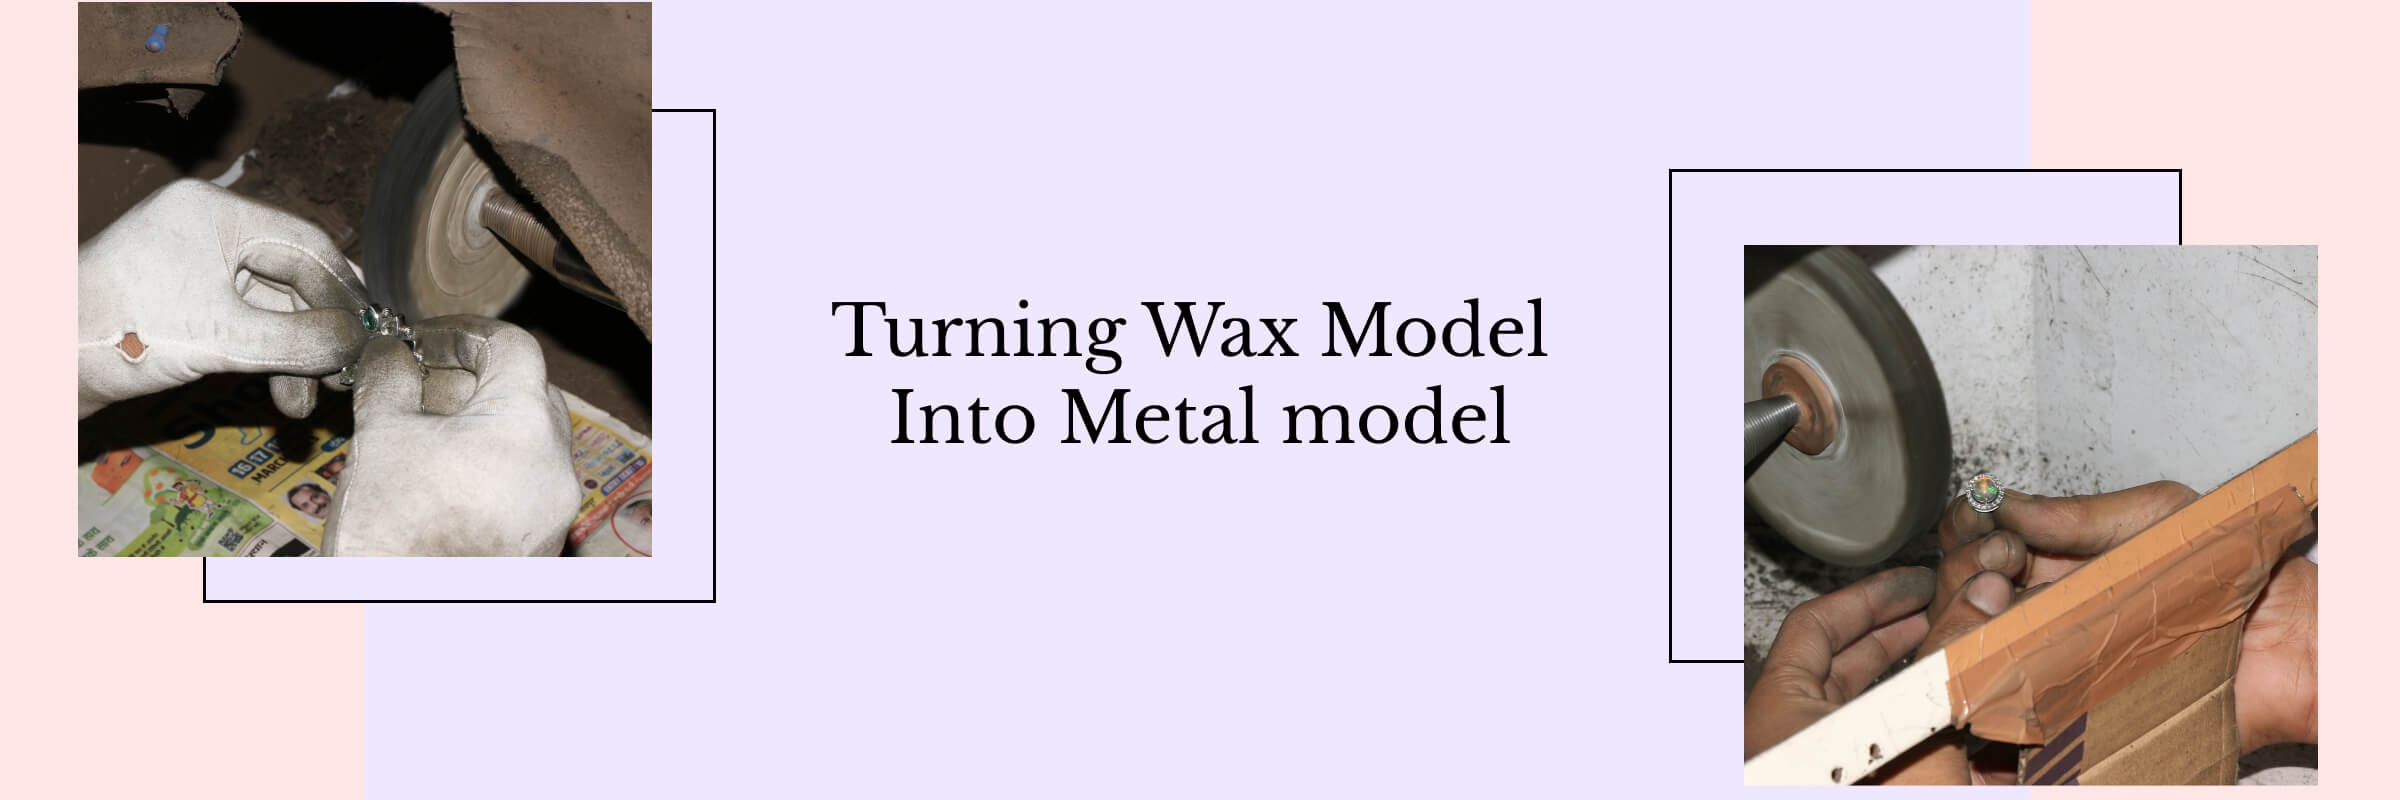 Casting The Wax Model Into Metal